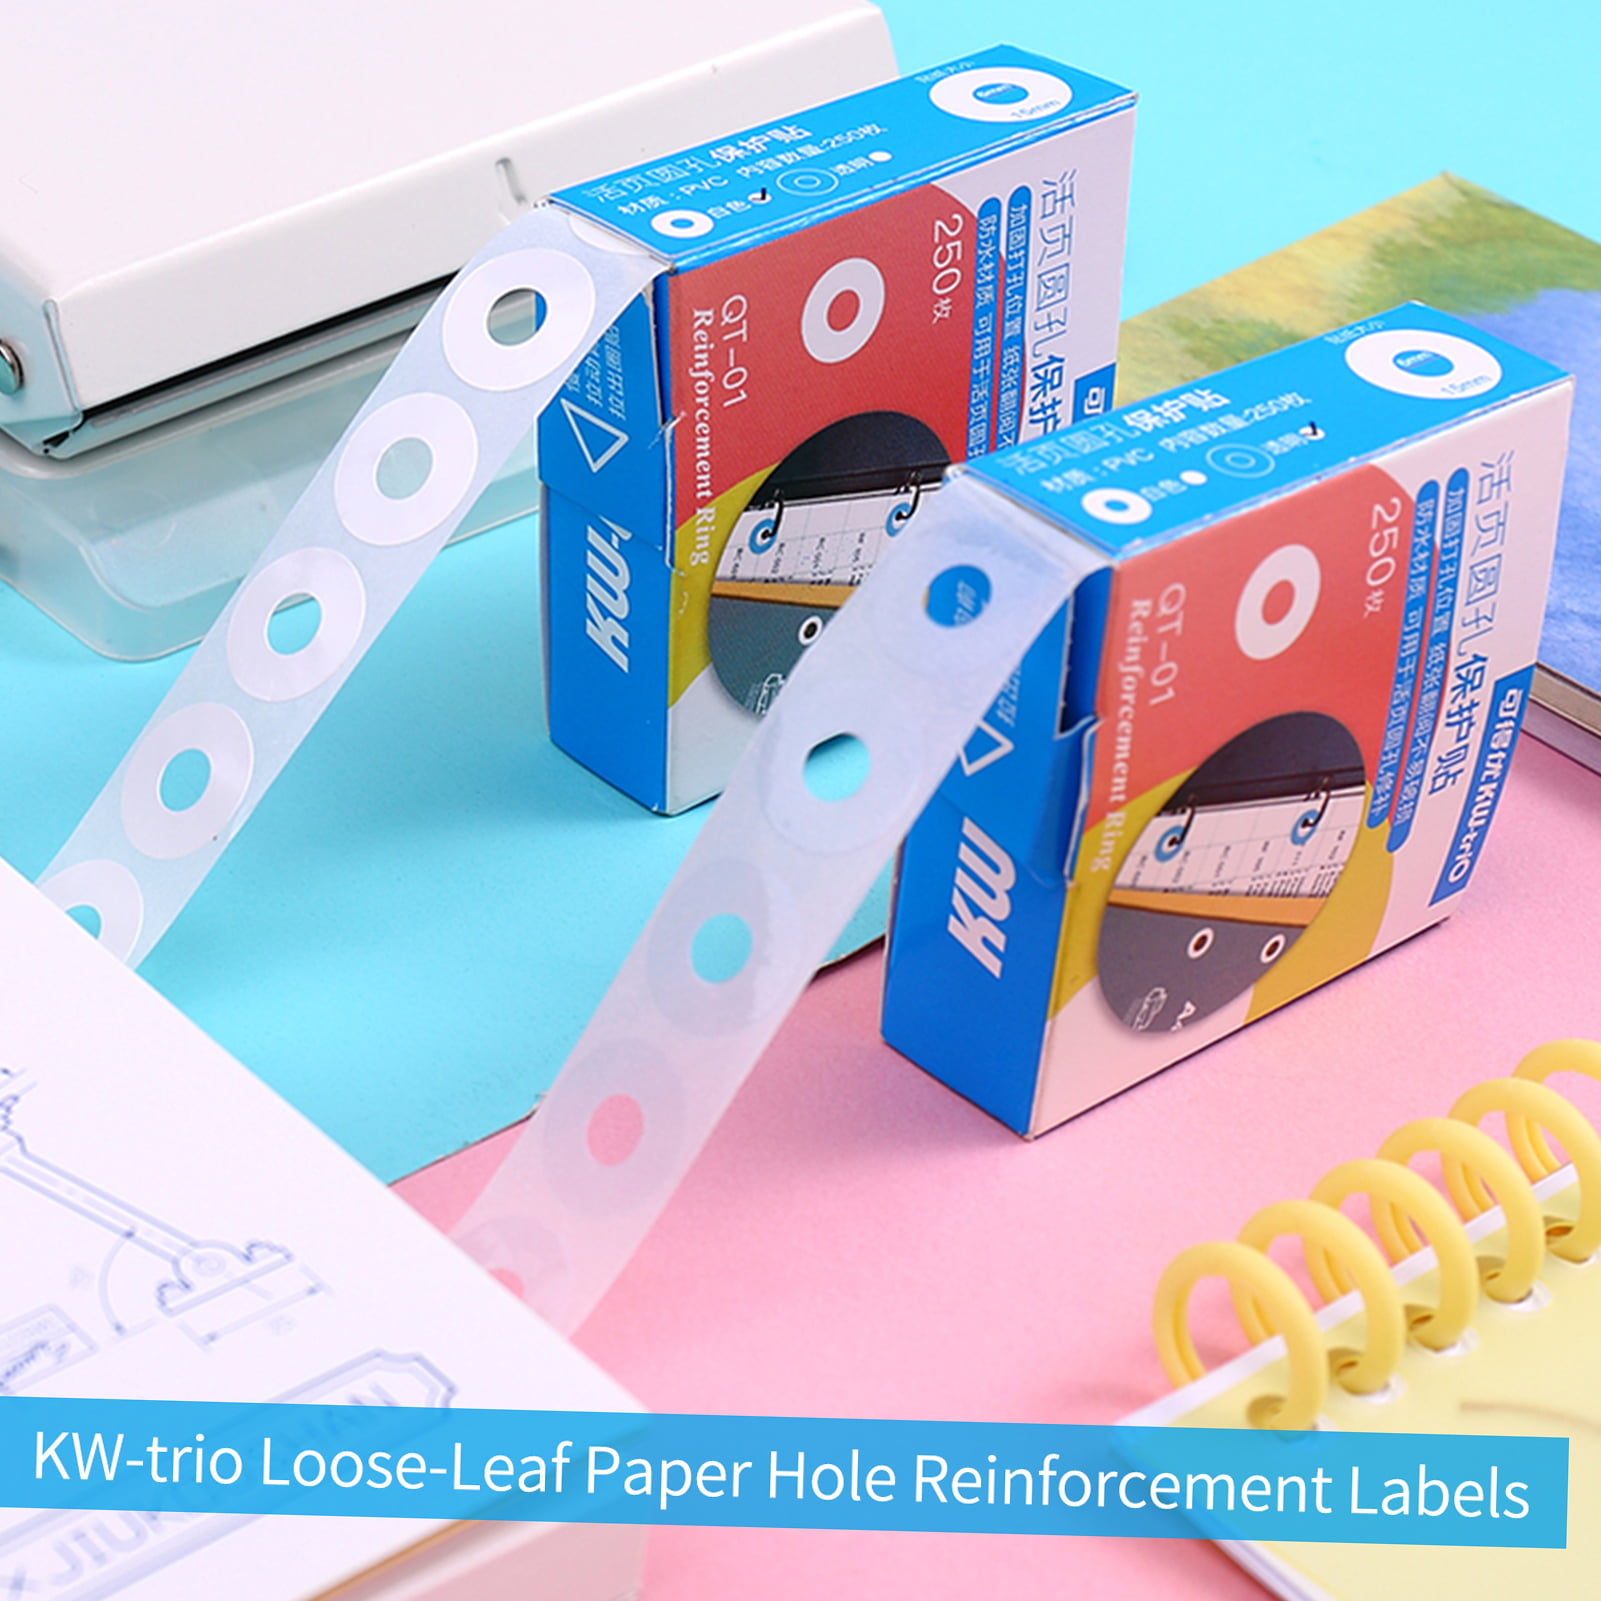 YOUOK Paper Hole Reinforcement Stickers Labels, Colorful Round Binder Page  Labels for Repairing Holes and Strengthening Holes,Great for School, Home